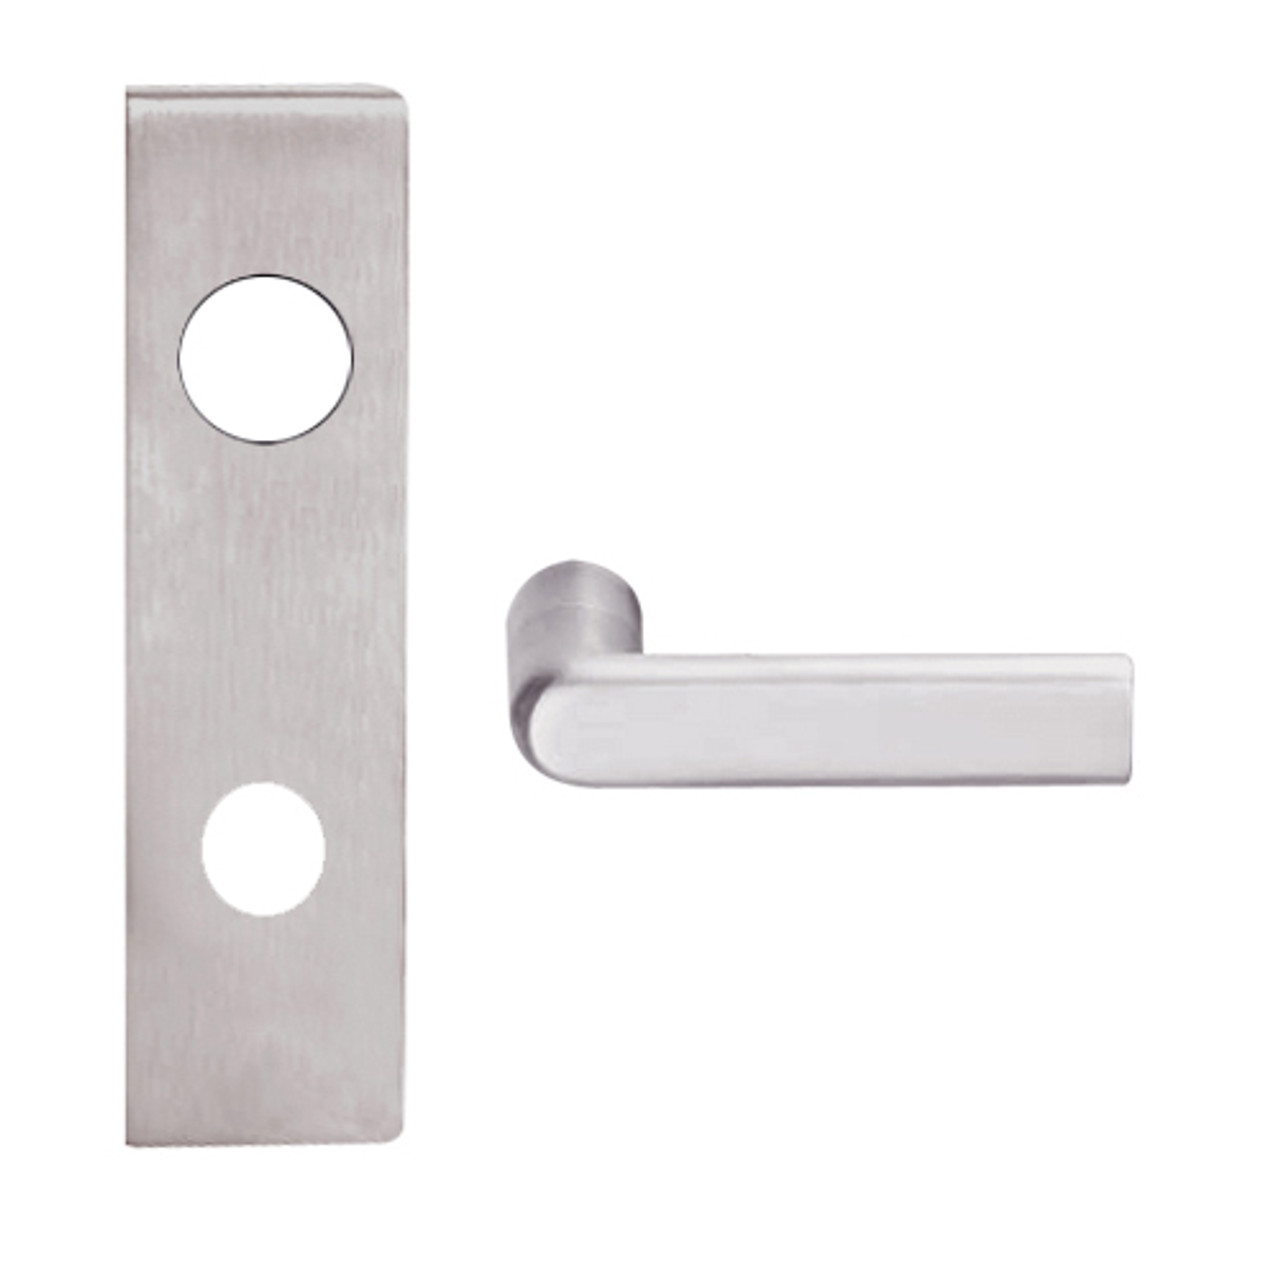 L9480L-01N-630 Schlage L Series Less Cylinder Storeroom with Deadbolt Commercial Mortise Lock with 01 Cast Lever Design in Satin Stainless Steel